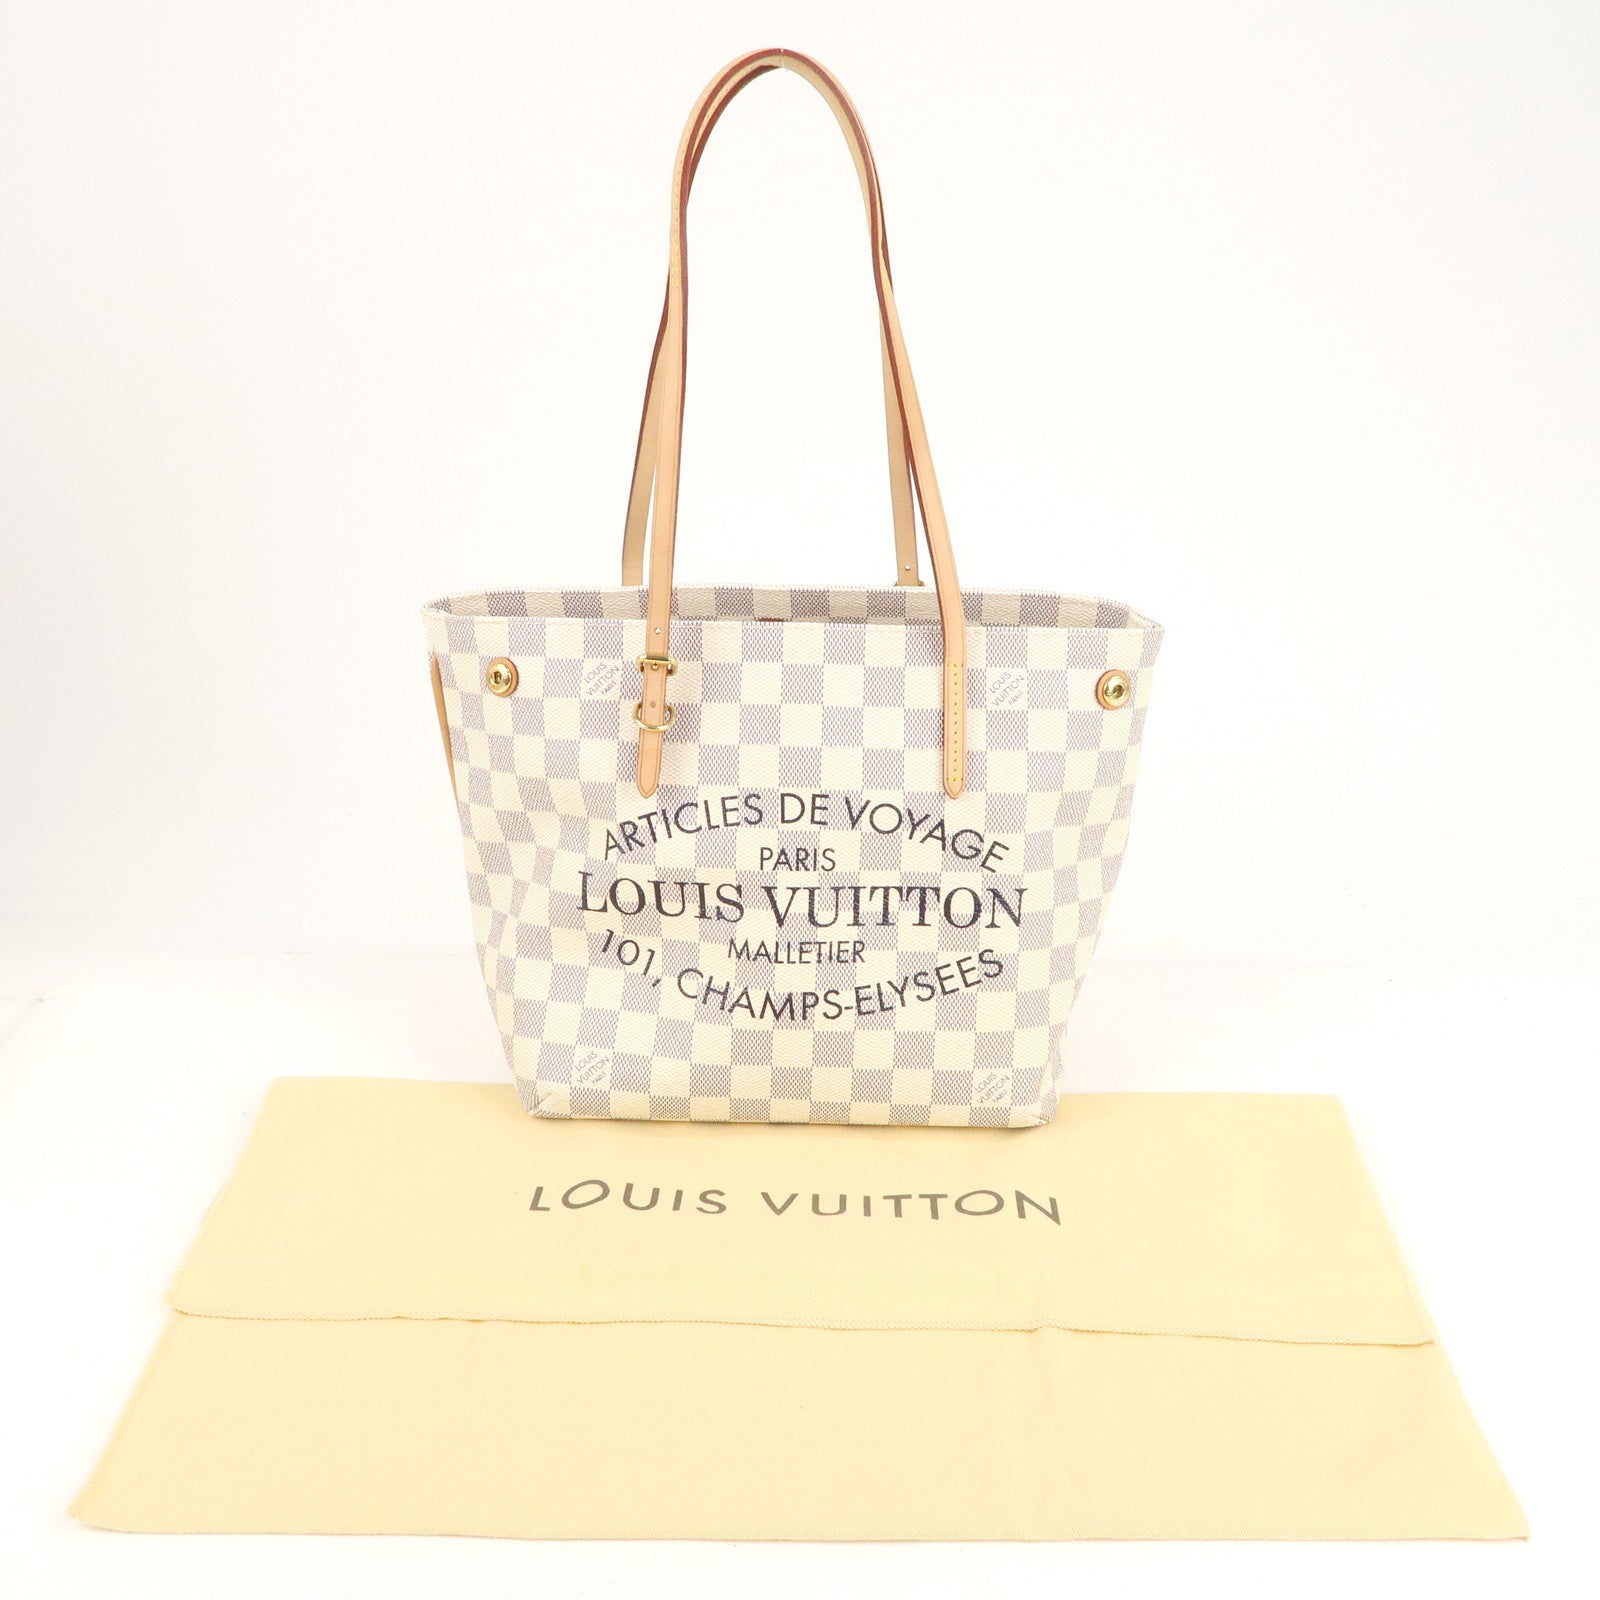 LOUIS VUITTON Neverfull MM Damier Azur Tote Bag White- 10% OFF